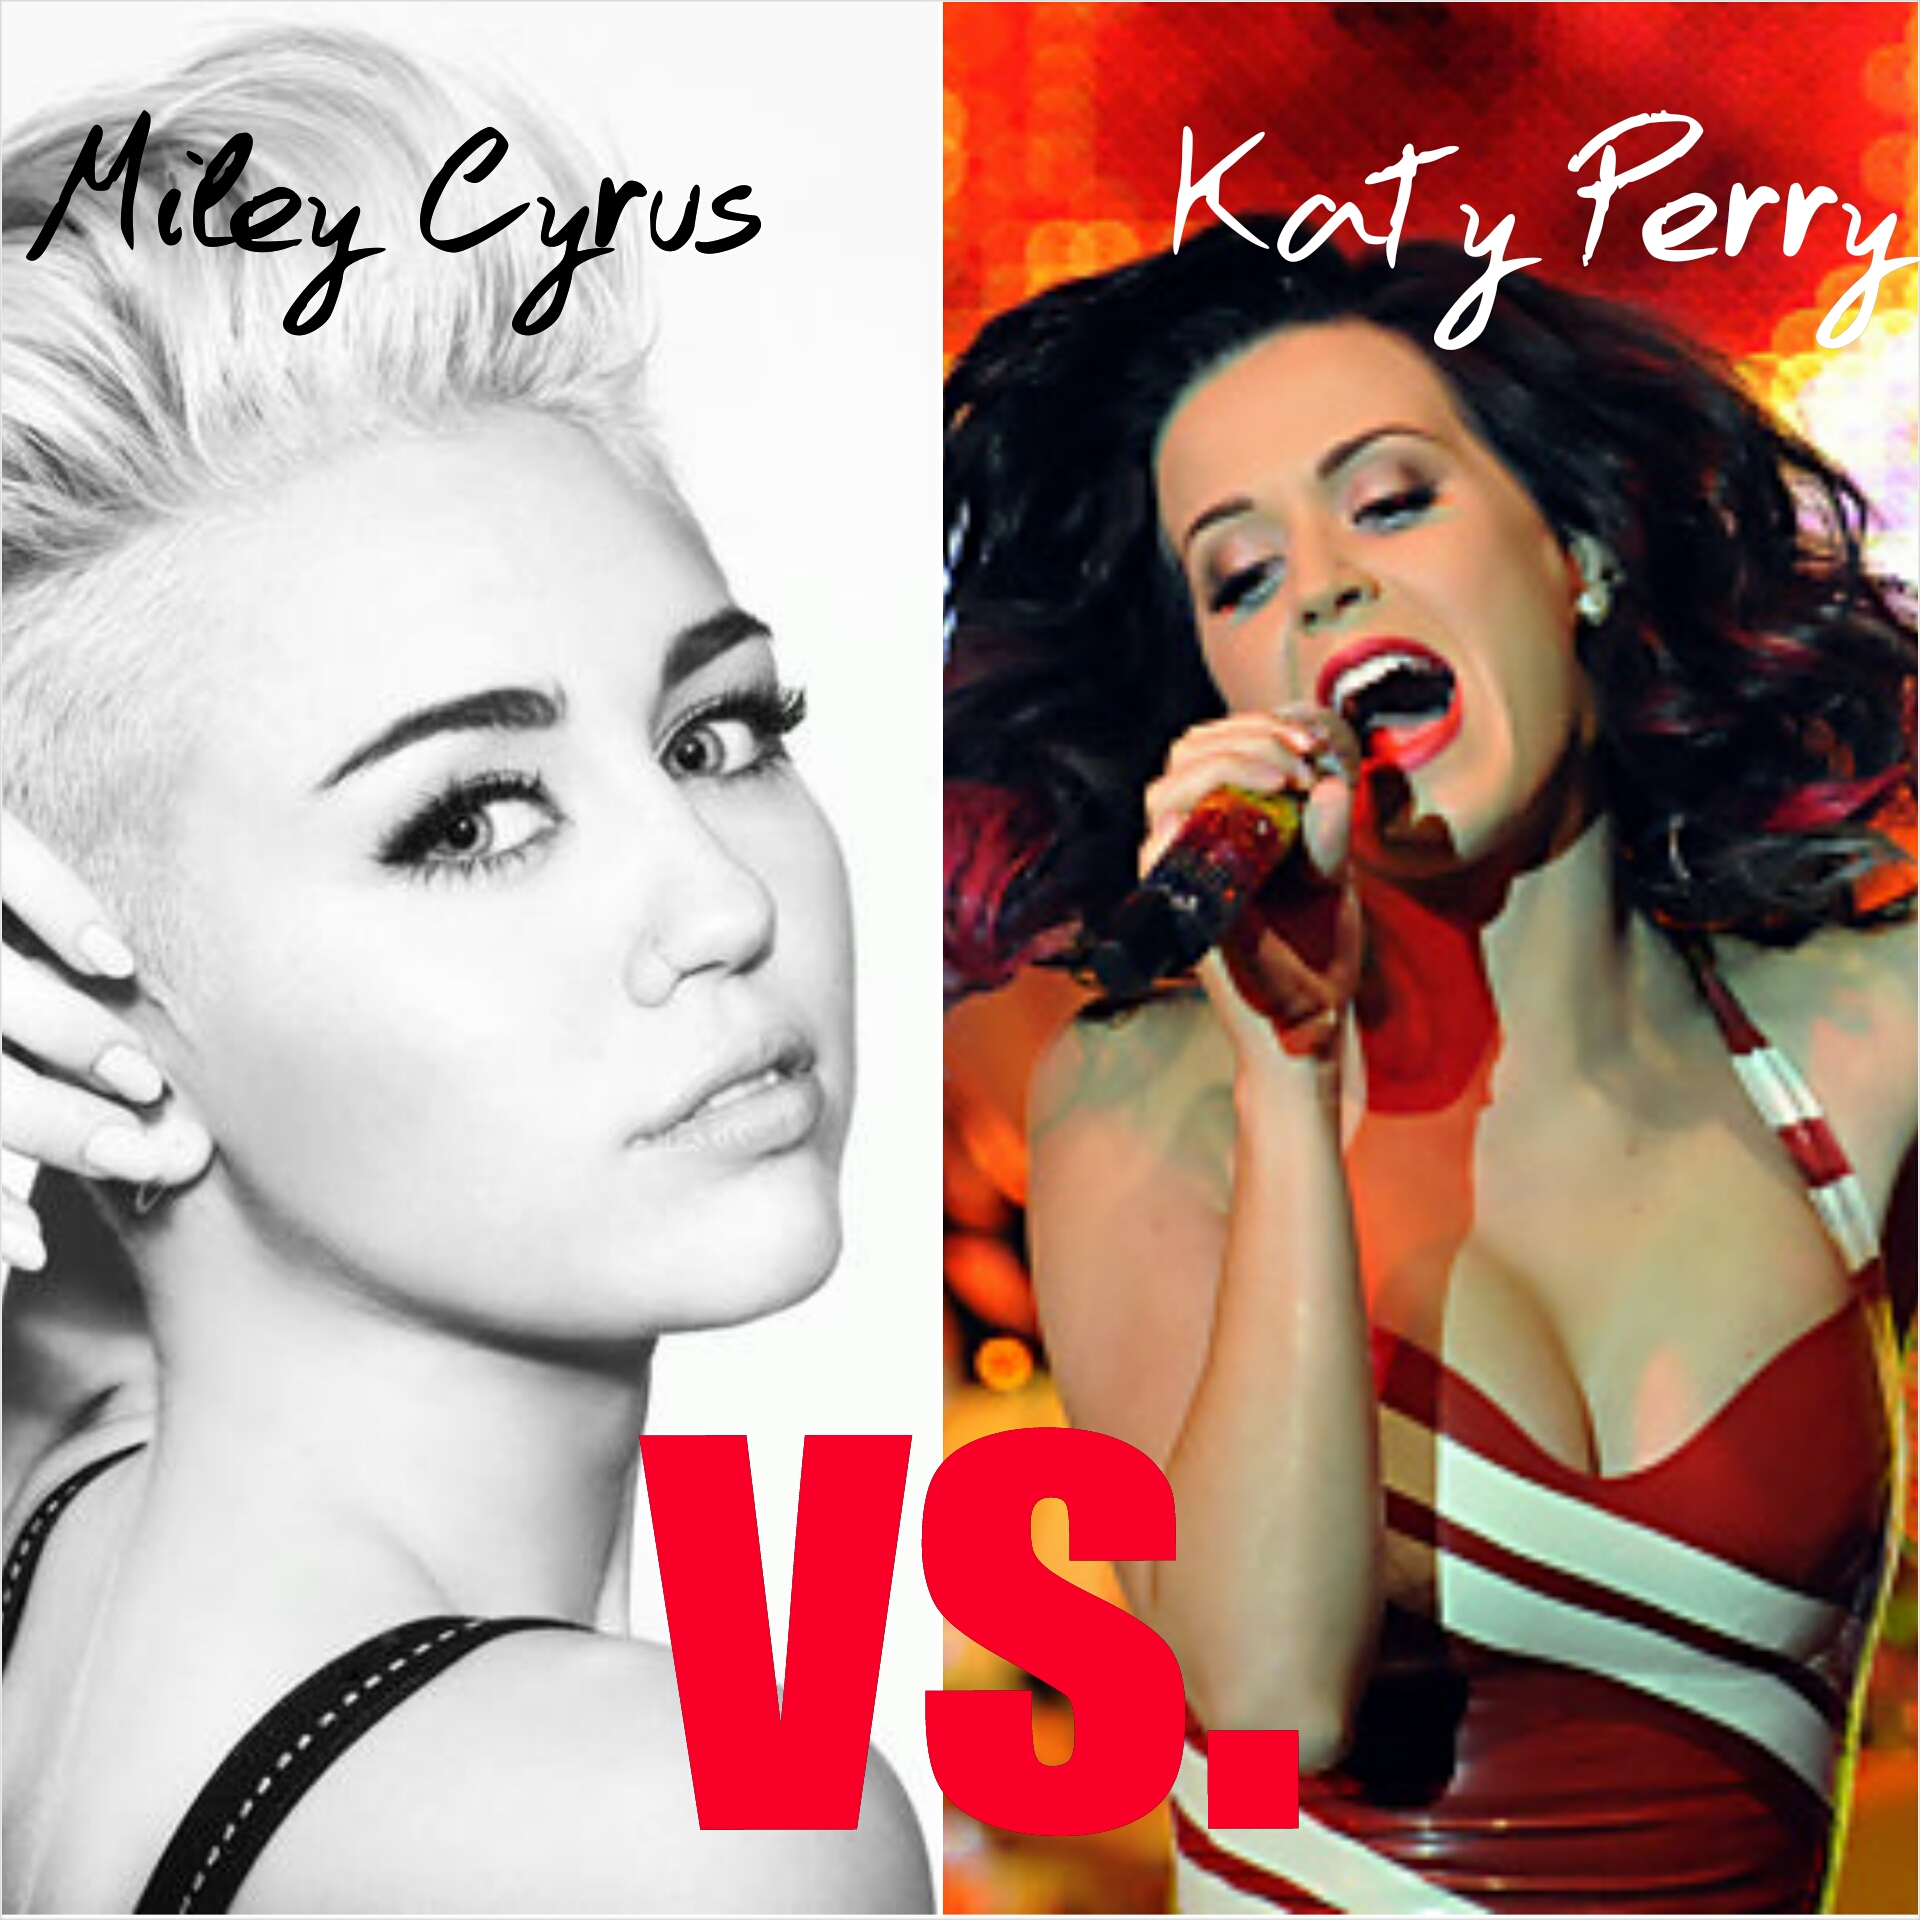 The Voice of Germany ~ Battles 
Miley Cyrus vs. Katy Perry